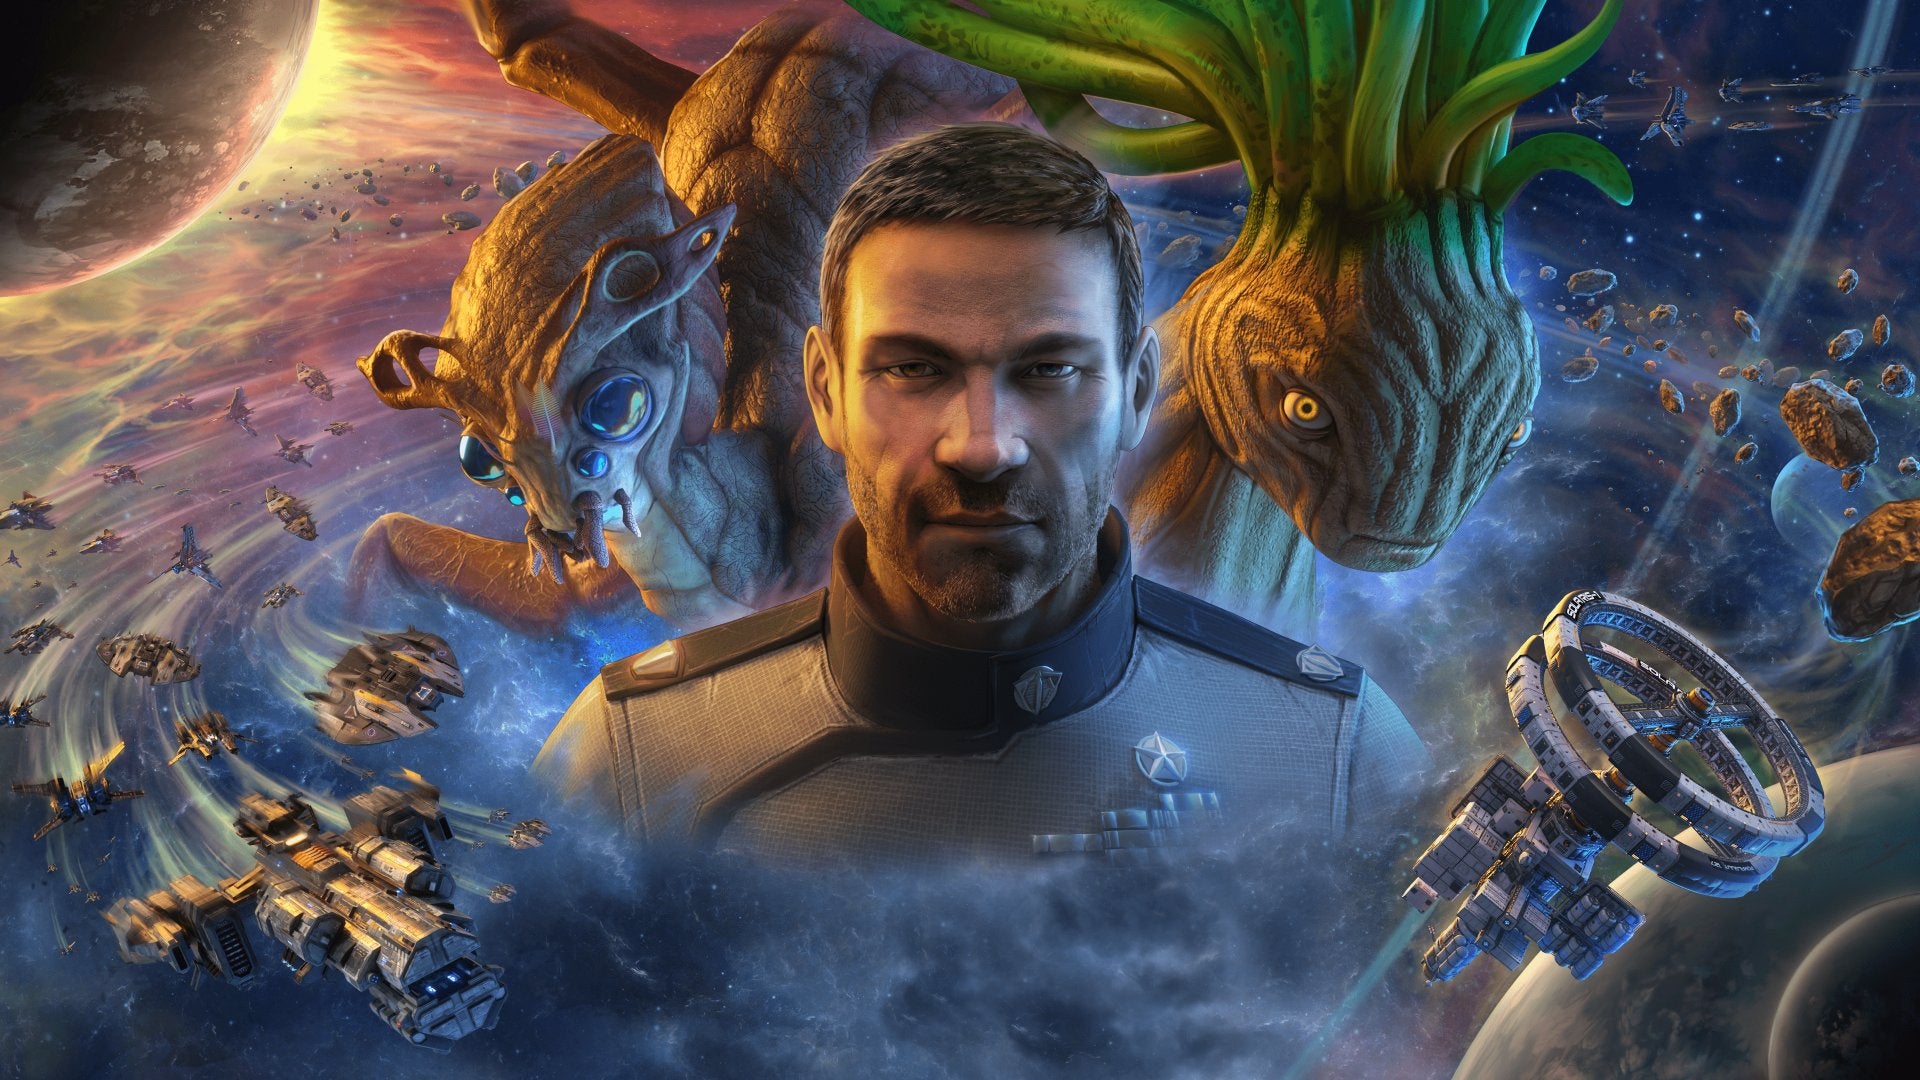 Galactic Civilizations 4 launches out of early access on the Epic Game Store